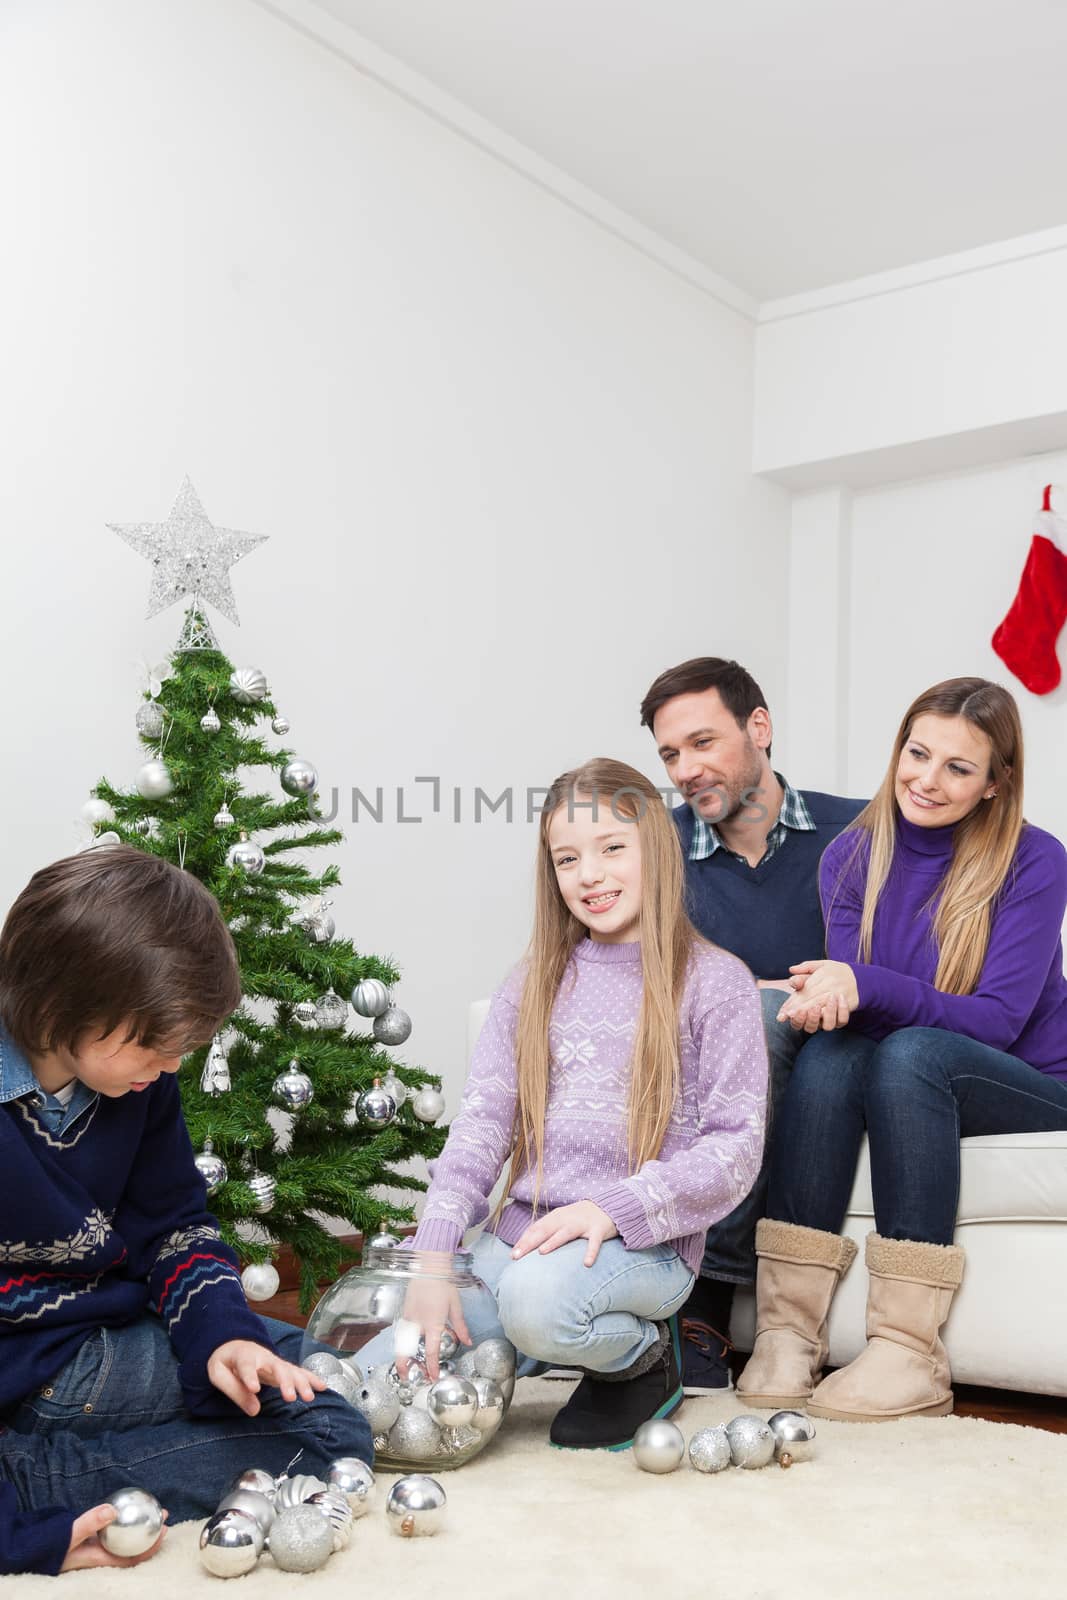 10-12, 8-10, apartment, balls, beautiful, blue, bowl, boy, brother, brothers, carpet, caucasian, celebration, child, children, christmas, cute, december, decor, decorated, decoration, festive, festivity, girl, girls, green, hanging, happiness, happy, holding, holiday, holidays, home, horizontal, house, joy, leisure, lifestyle, little, merry, model, old, open, person, property, releases, room, santa, silver, sitting, tree, years, couch, parents, 30-35, sofa, star